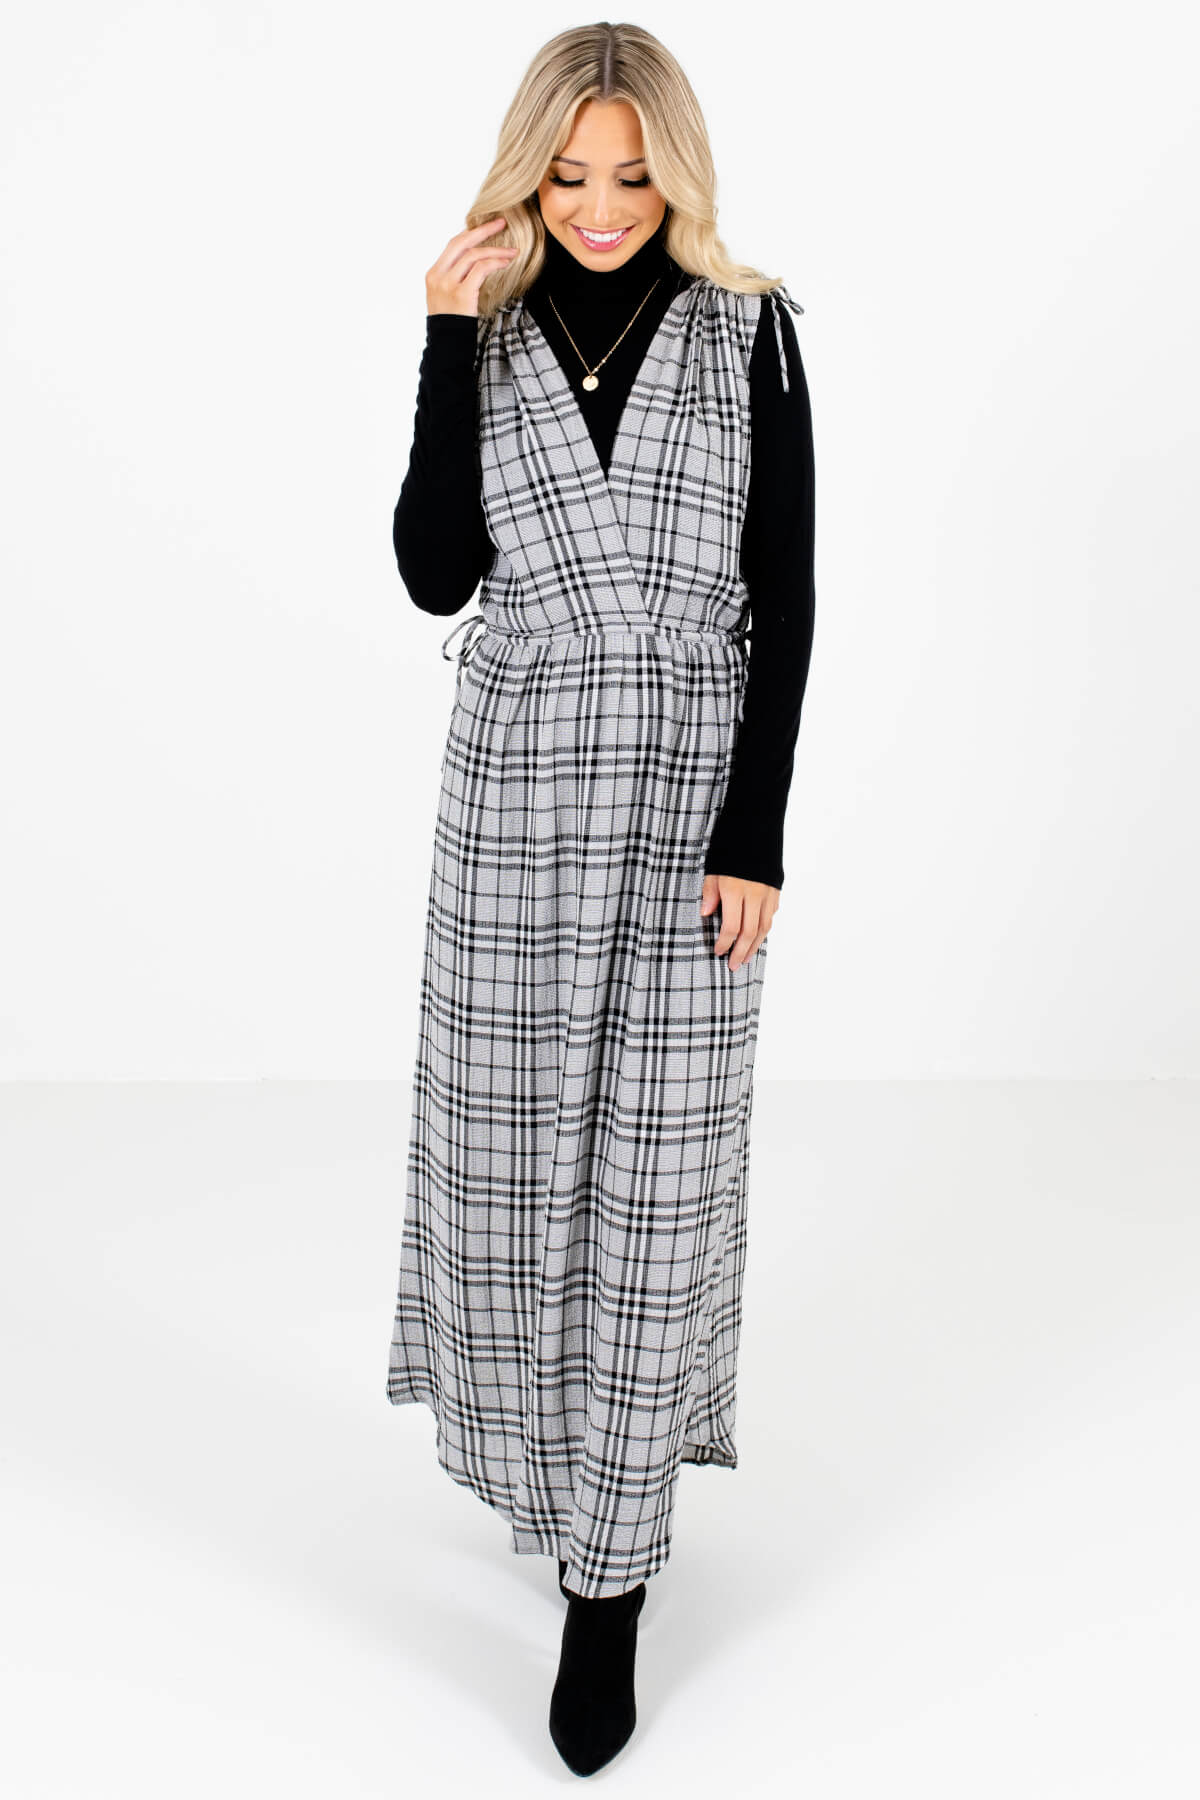 Gray Plaid Cute and Comfortable Boutique Maxi Dresses for Women